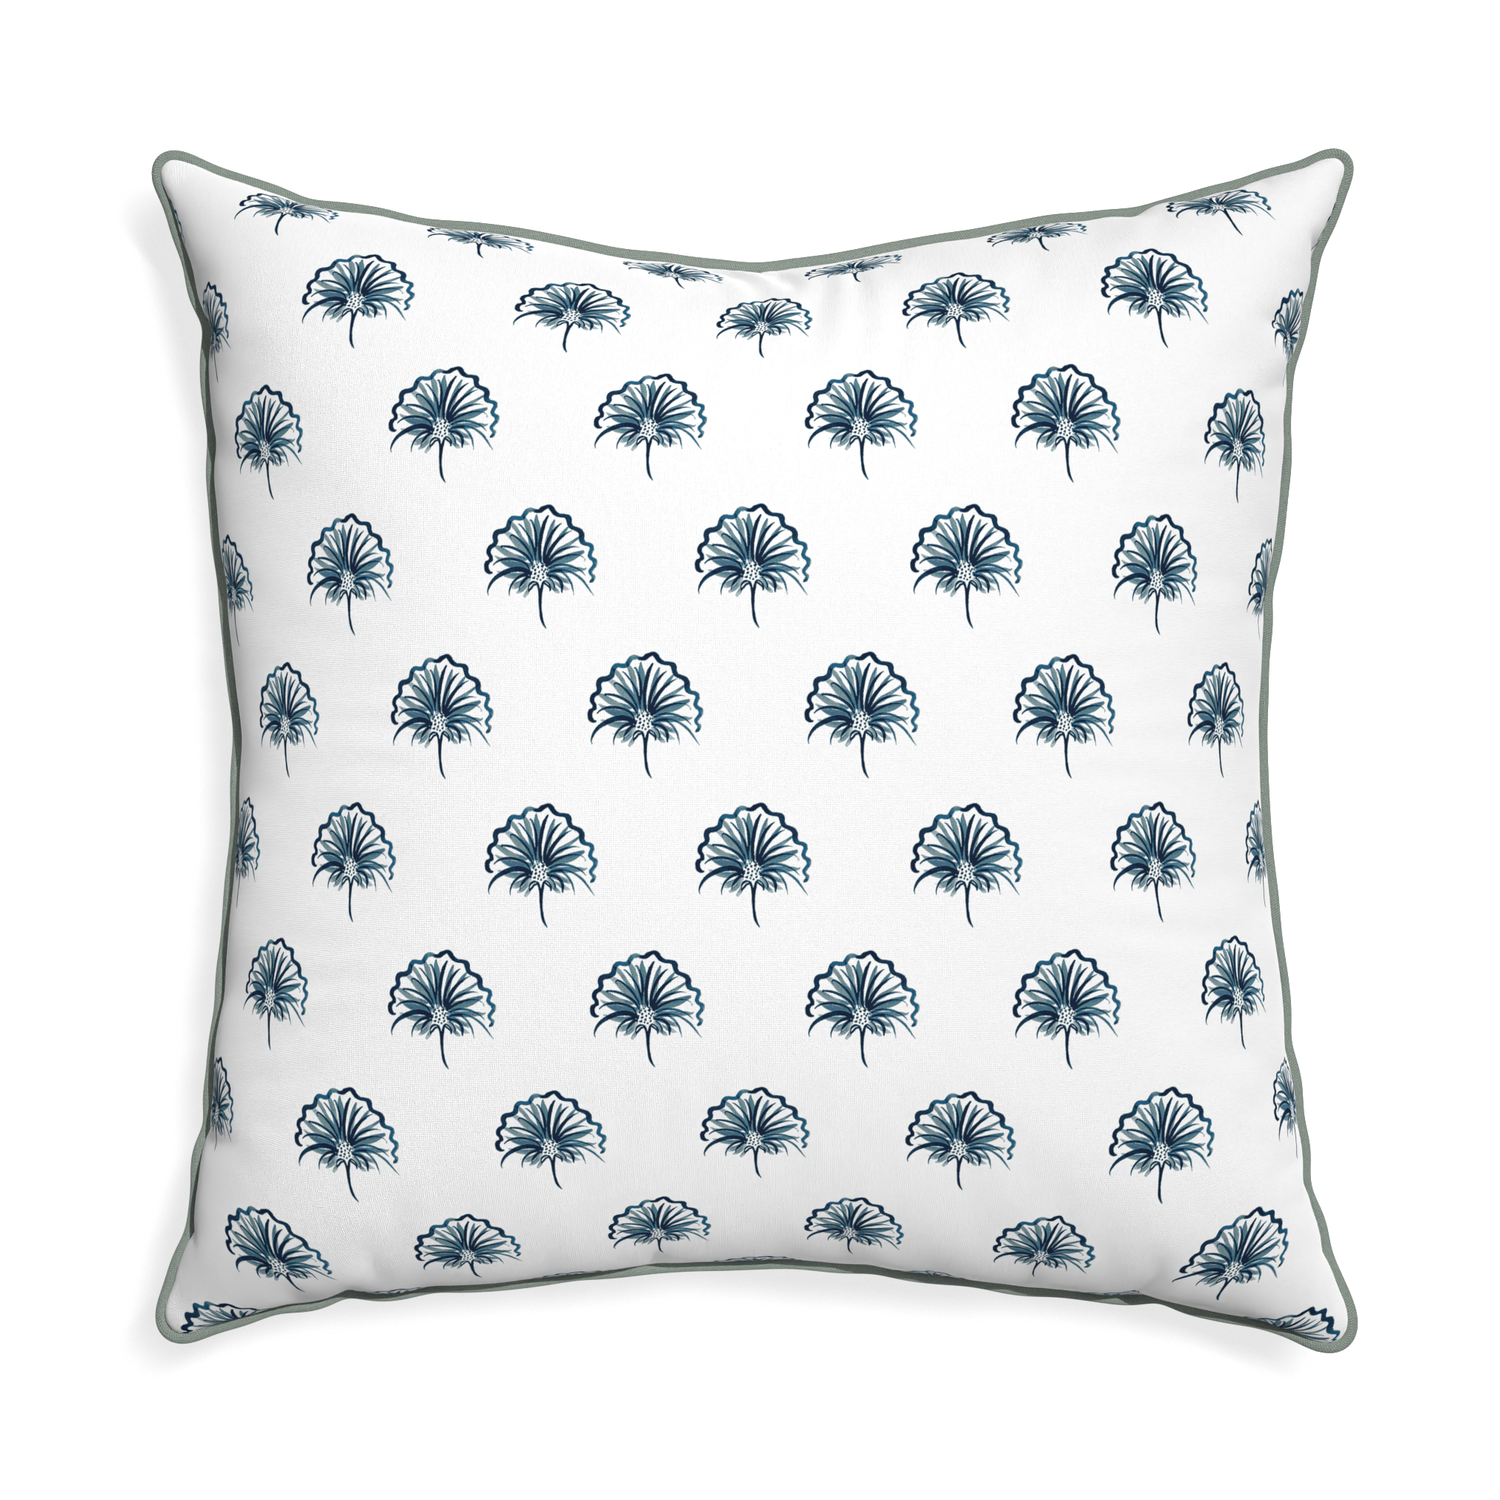 Euro-sham penelope midnight custom floral navypillow with sage piping on white background